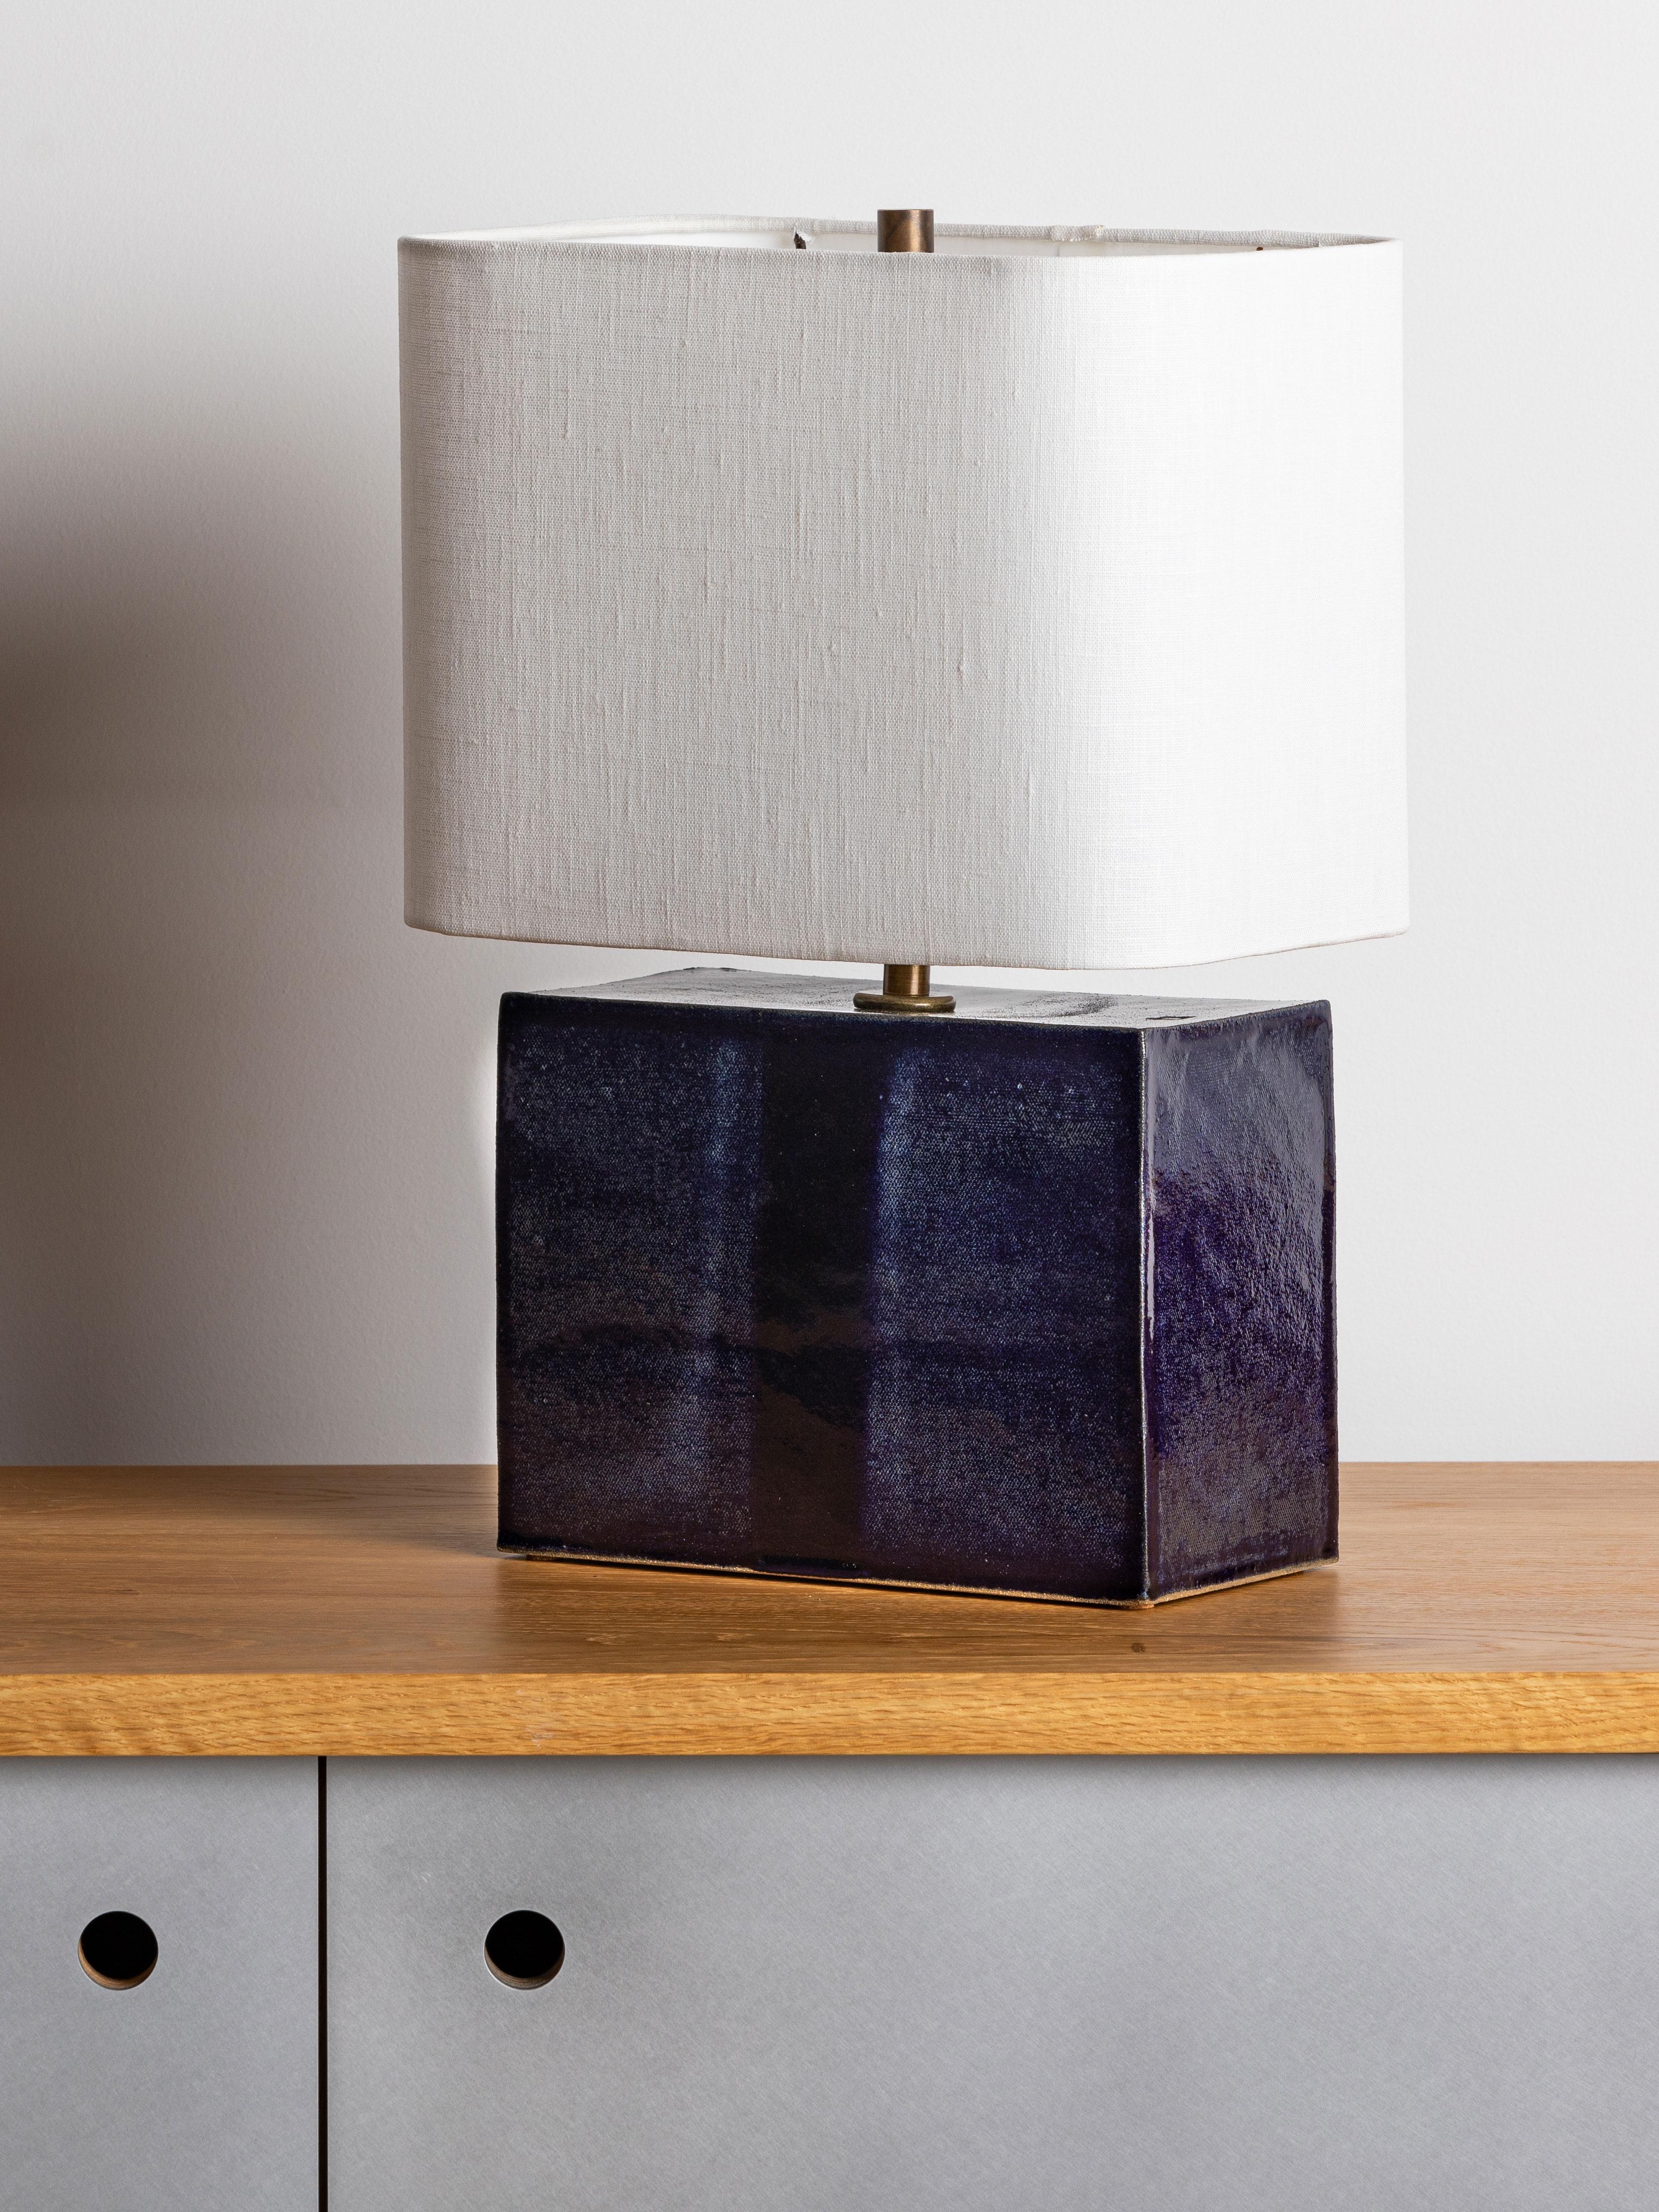 Our stoneware New Preston lamp is handcrafted using slab-construction techniques.

Finish

- Dipped glaze, pictured in navy 
- Antique brass fittings
- Twisted black-cloth cord
- Full-range dimmer socket
- Rectangular round-corner linen